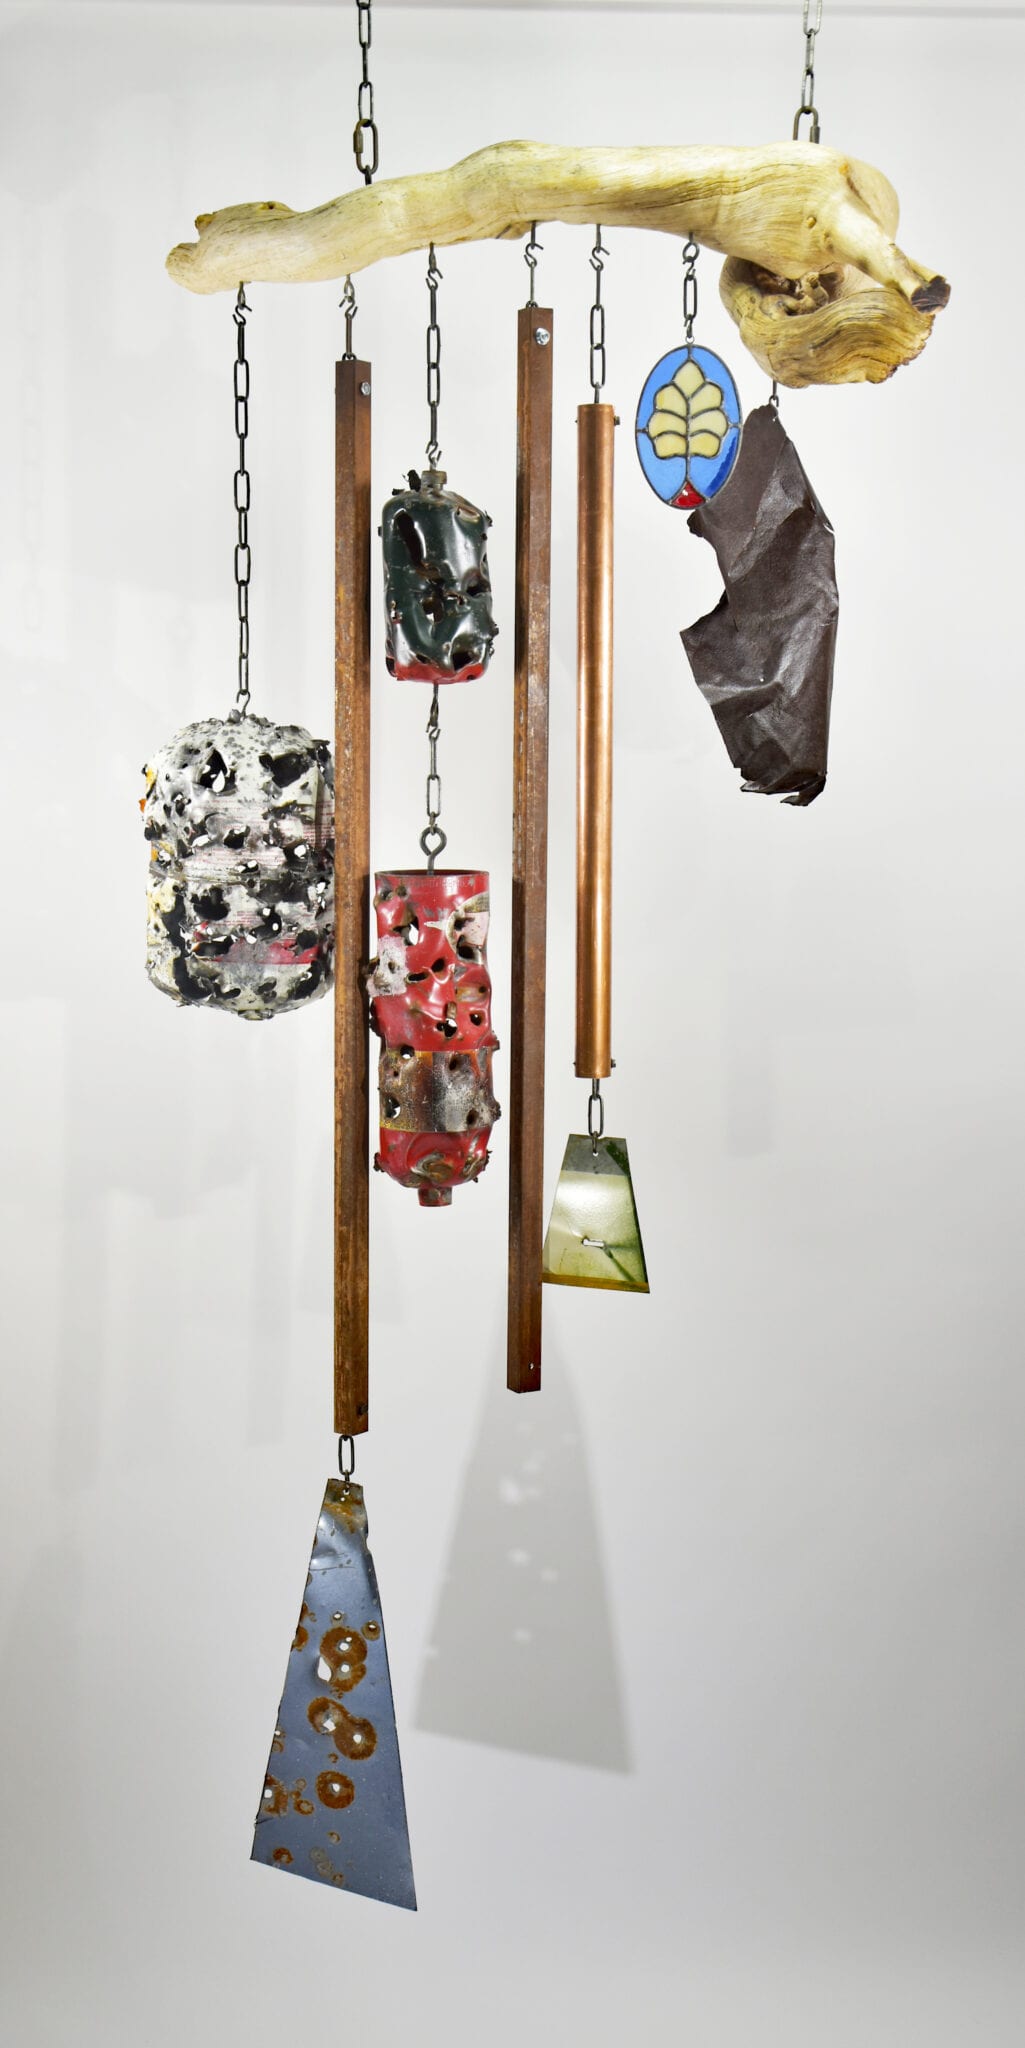 A Unique and beautiful Wind Chime Art from Spirit Chaser Series